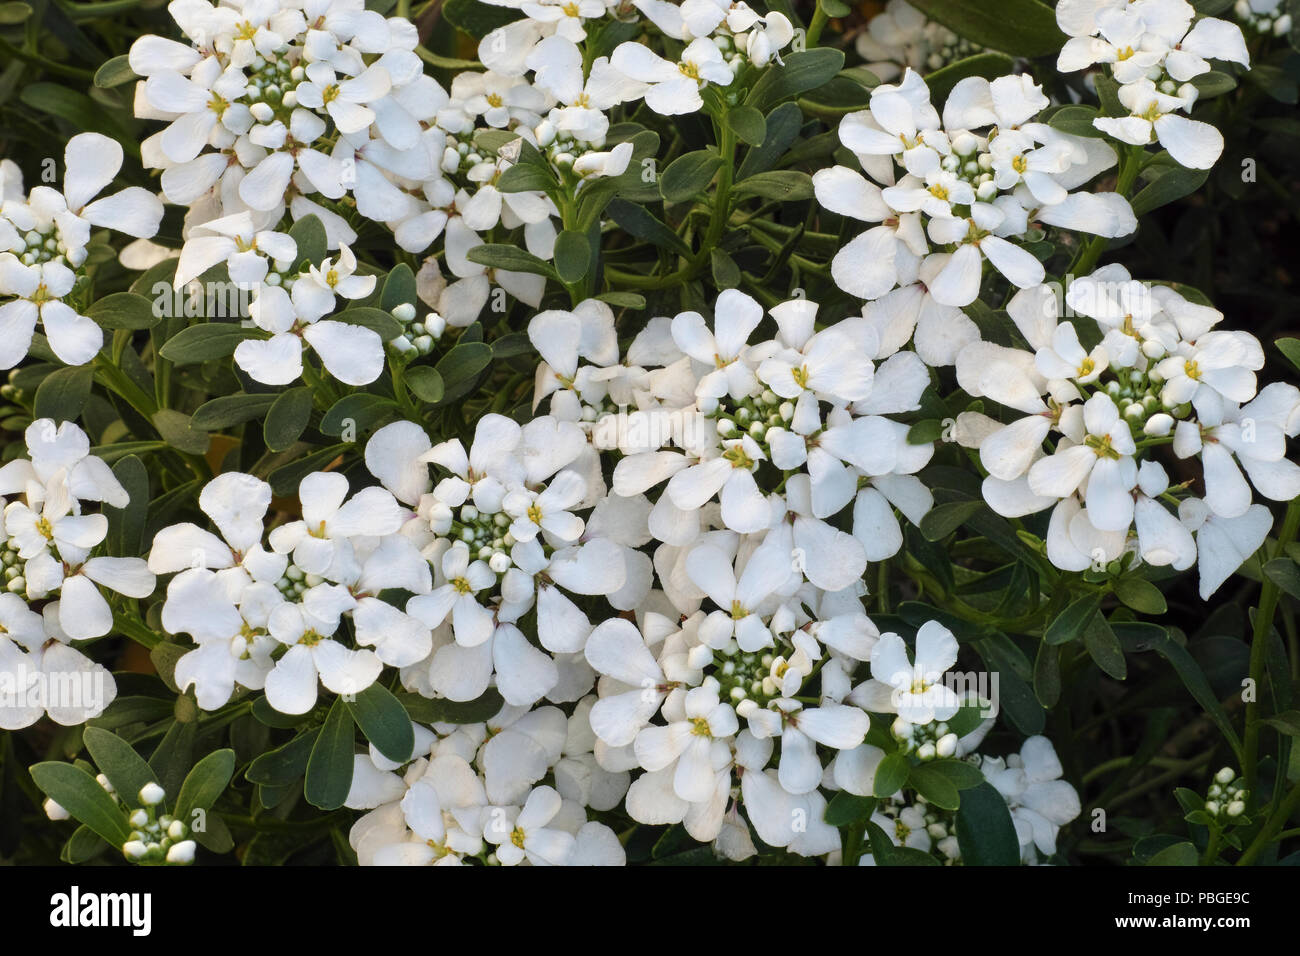 plants of perennial candytuft, flowers and leaves, Iberis semperflorens Stock Photo